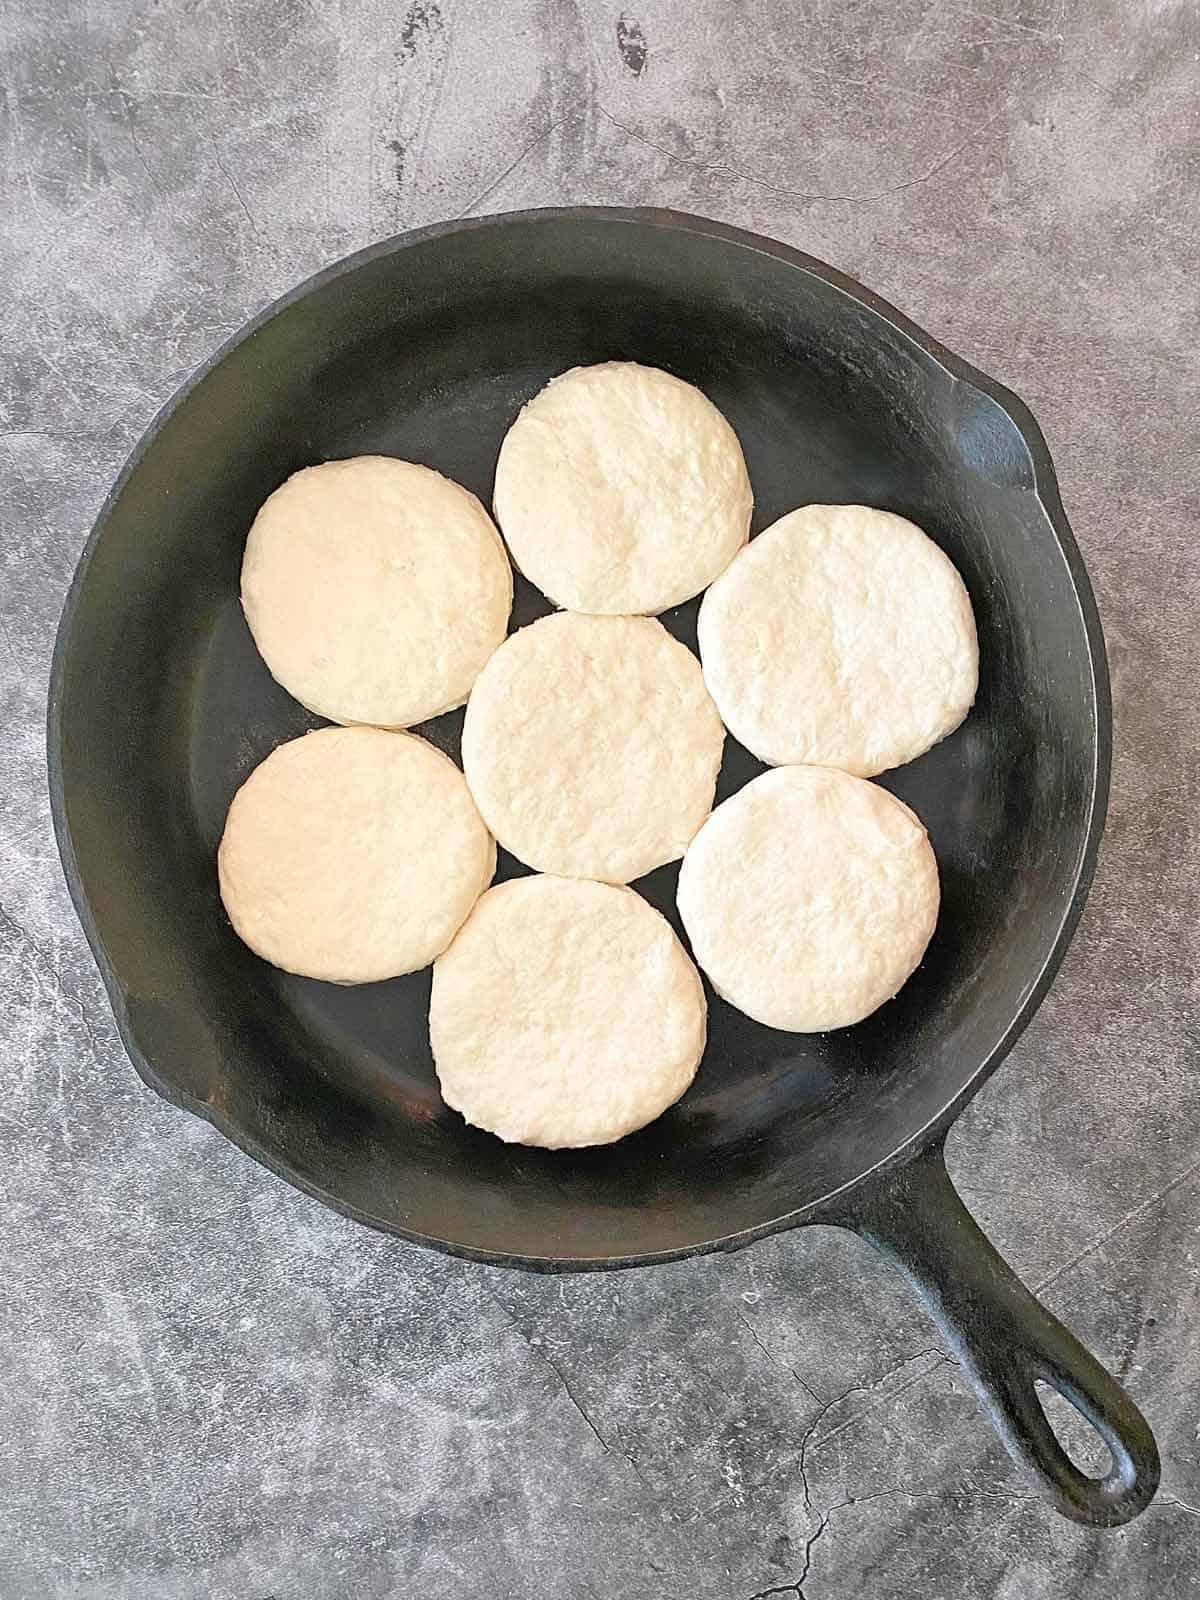 Seven unbaked biscuits in the middle of a cast iron skillet.